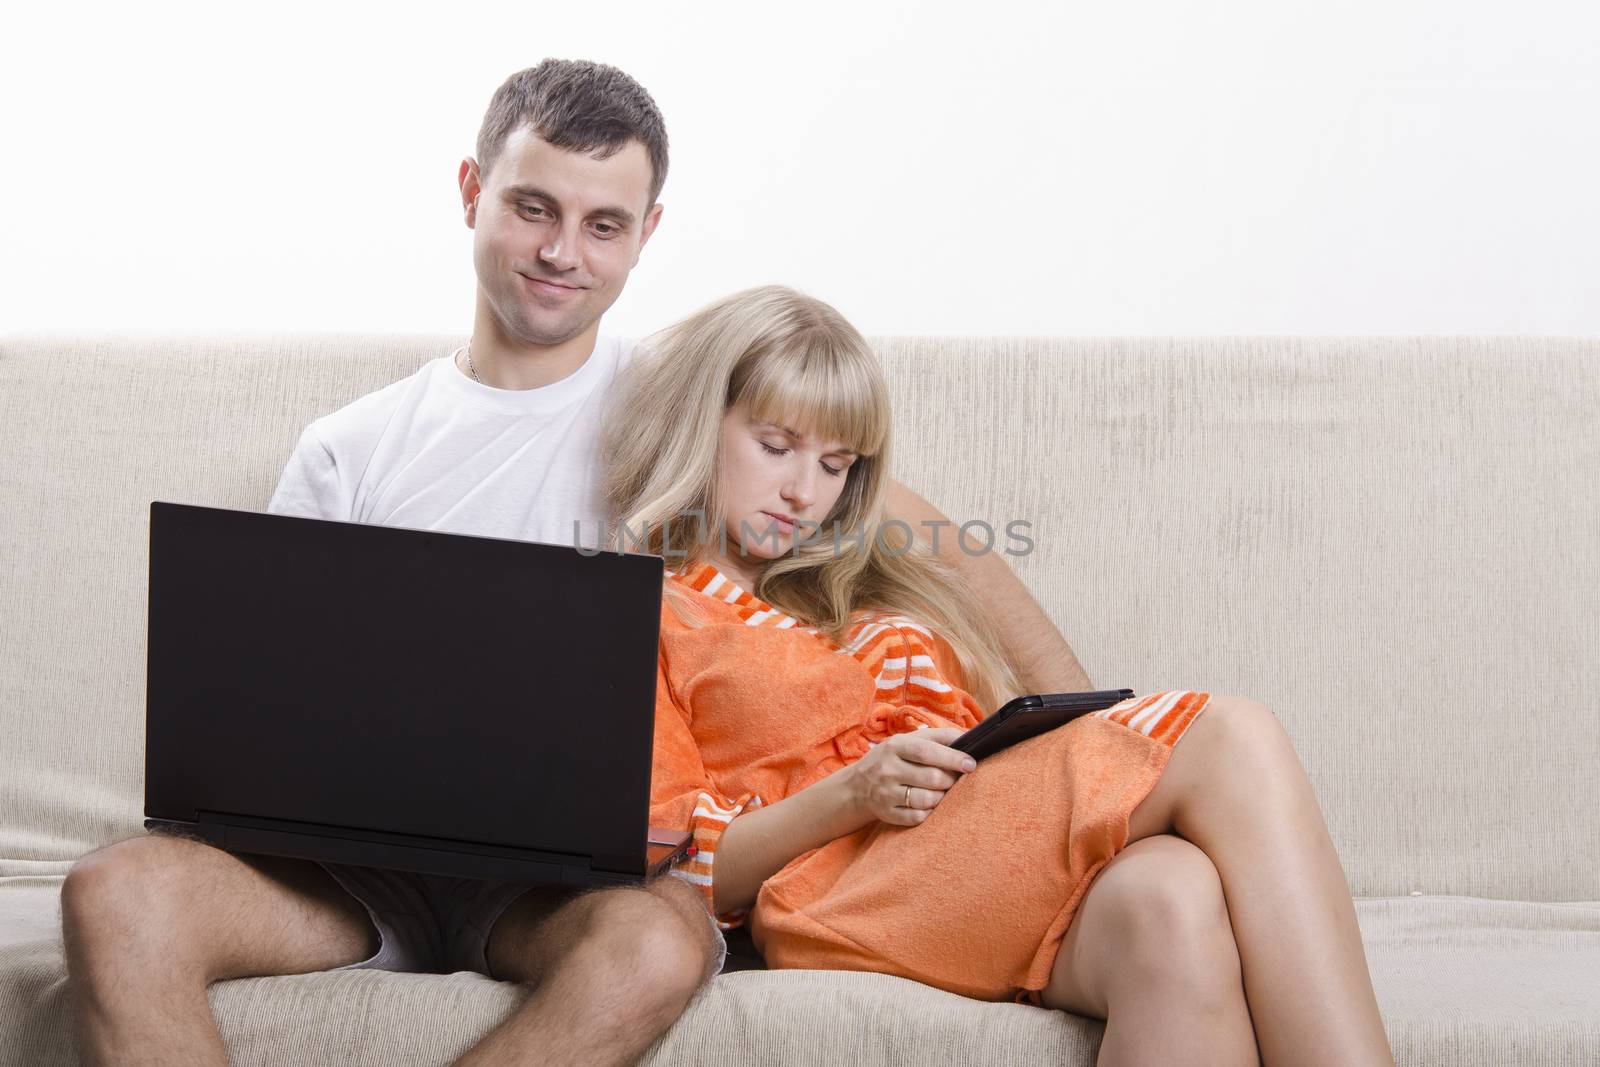 Guy and girl asleep, sitting on couch with laptop by Madhourse